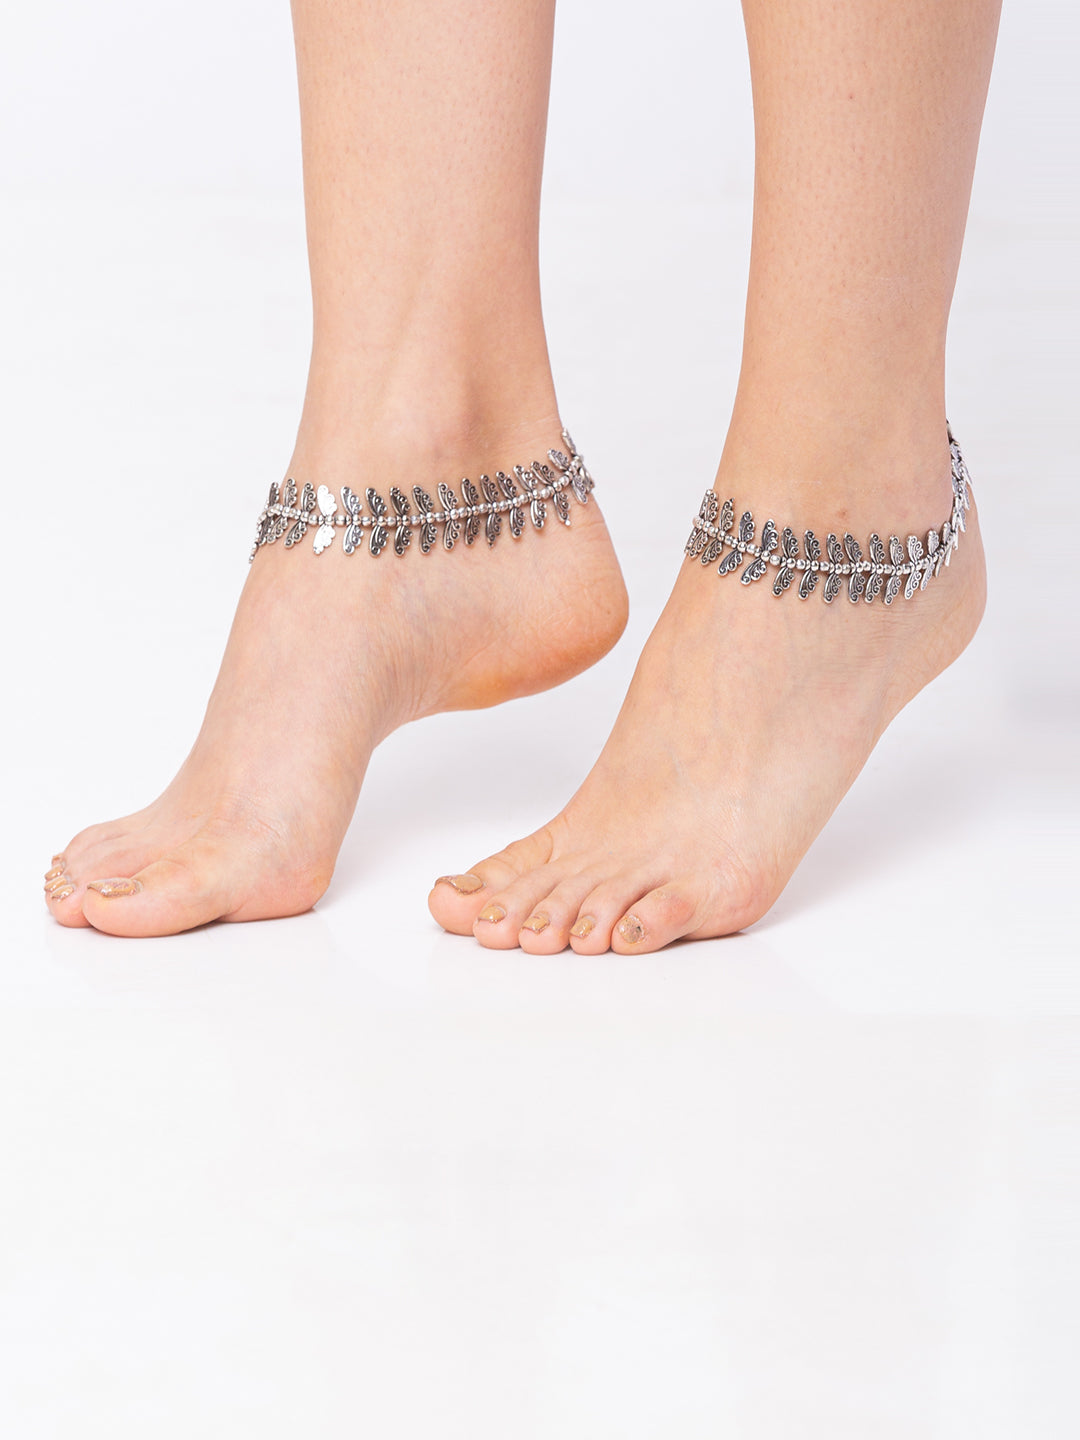 German Oxidised Silver Anklets Butterfly Engraved Payal Silver Plating & Beads Paijan Foot Jewellery